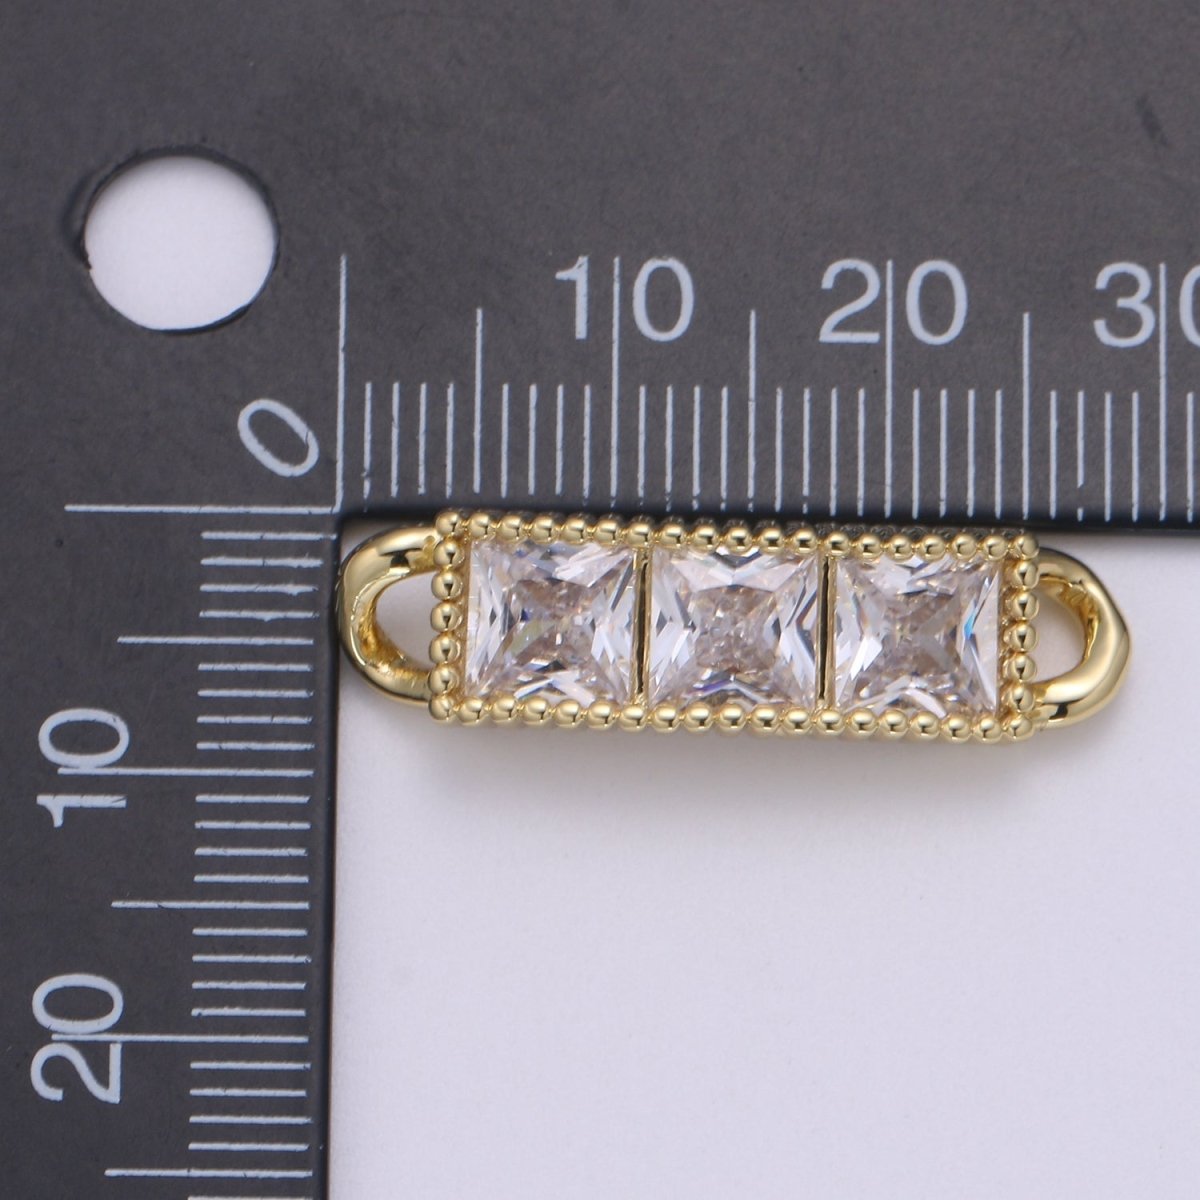 14K Gold Cz paved Connectors, Charm Cubic Micro paved, Rows of Diamond cut CZ Jewelry Craft Supply, DIY Bracelet & necklace F-601 - DLUXCA